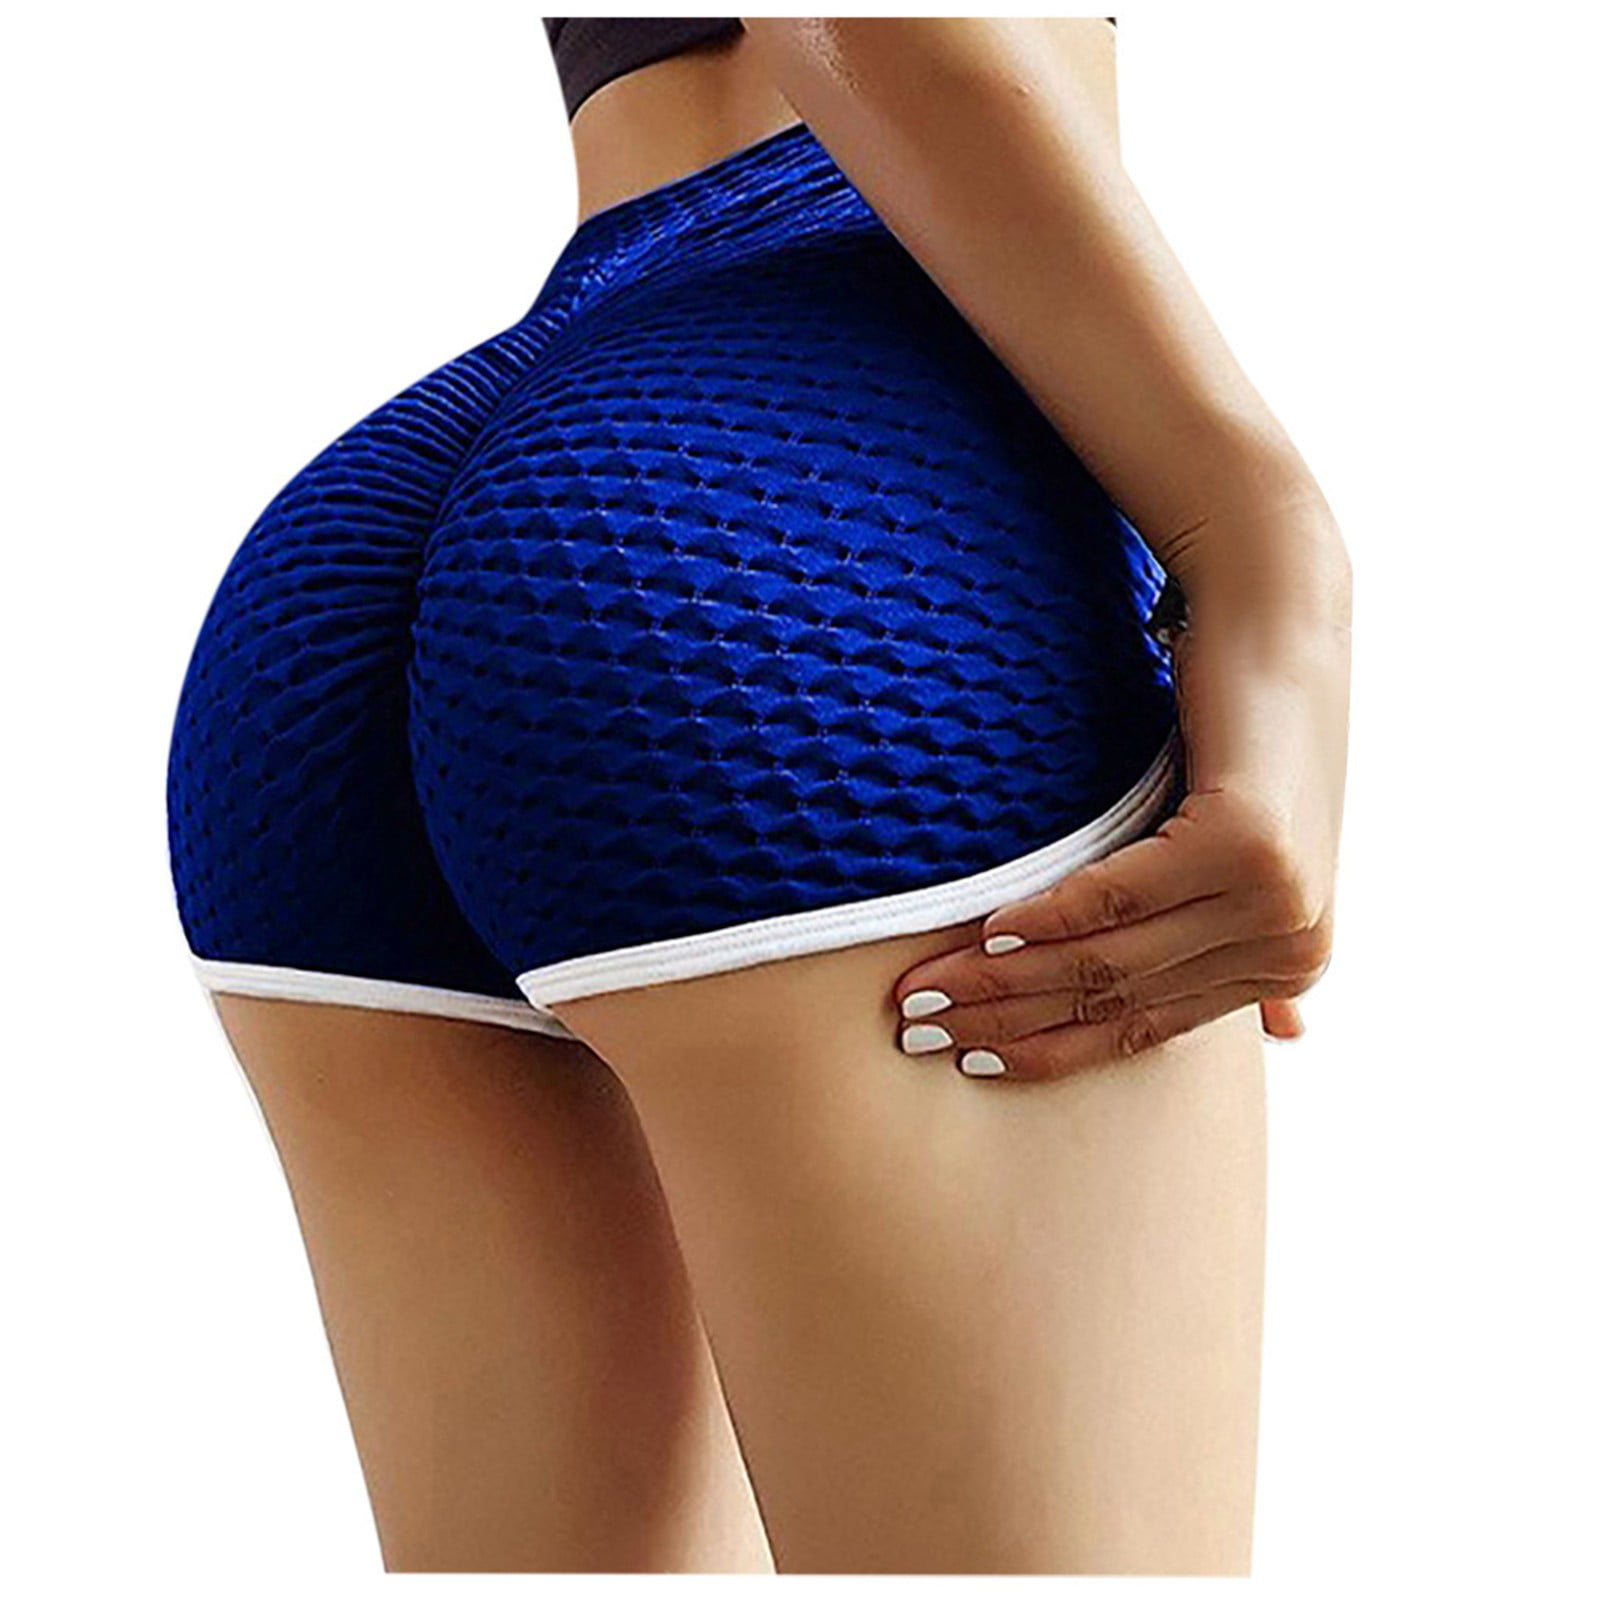 Lilvigor Women's High Waist Textured Yoga Pants Ruched Butt Lifting Anti  Cellulite Tummy Control Workout Leggings 